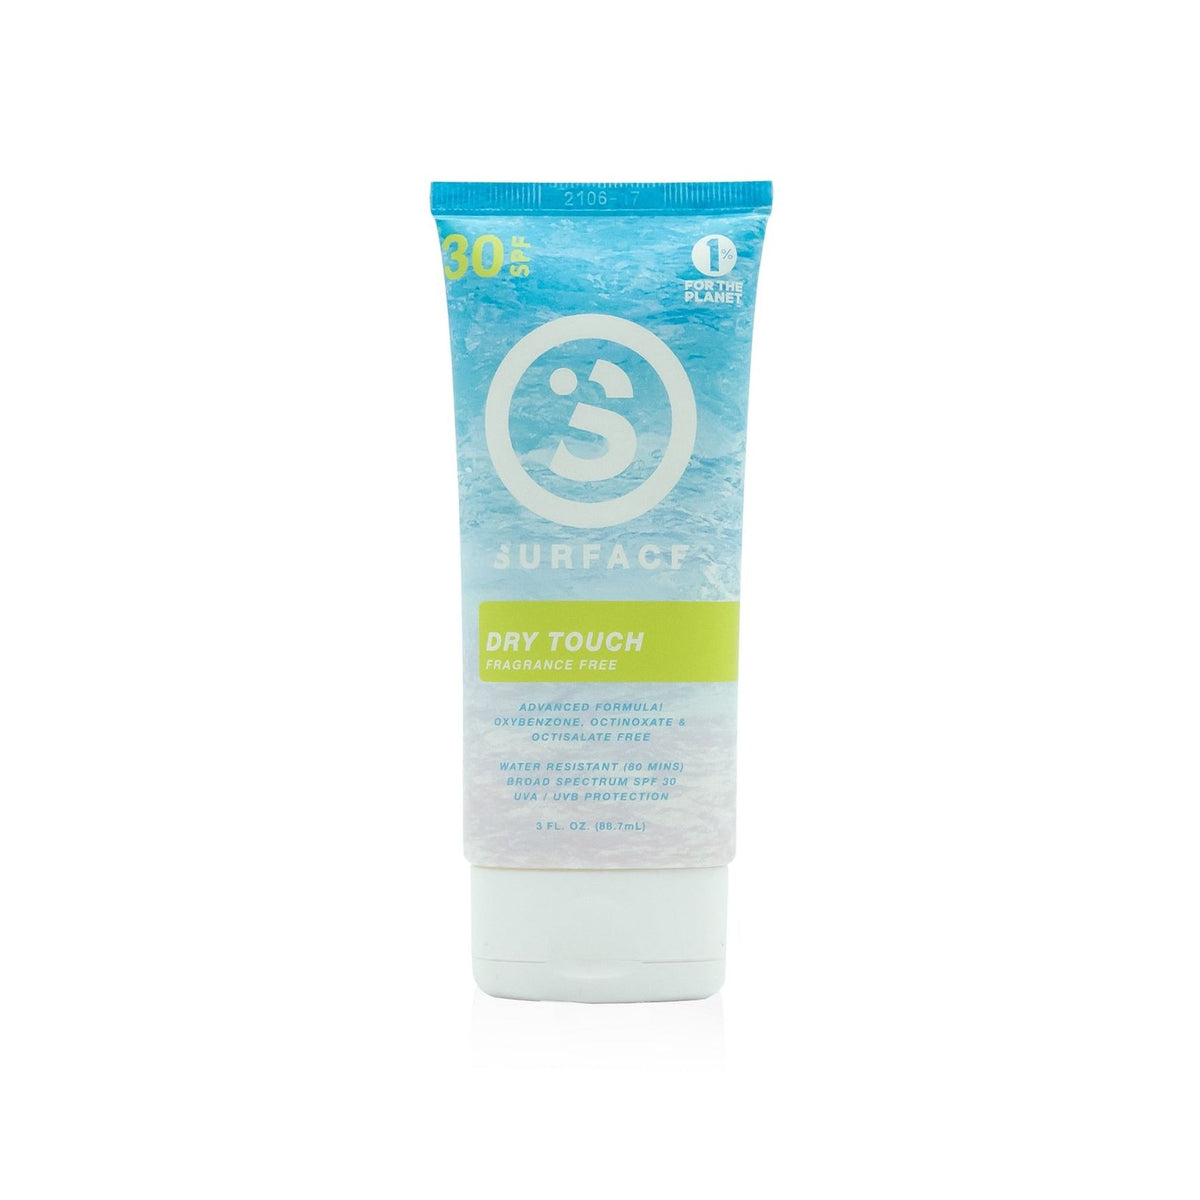 SURFACE SPF30 DRY TOUCH SUNSCREEN LOTION 3OZ.